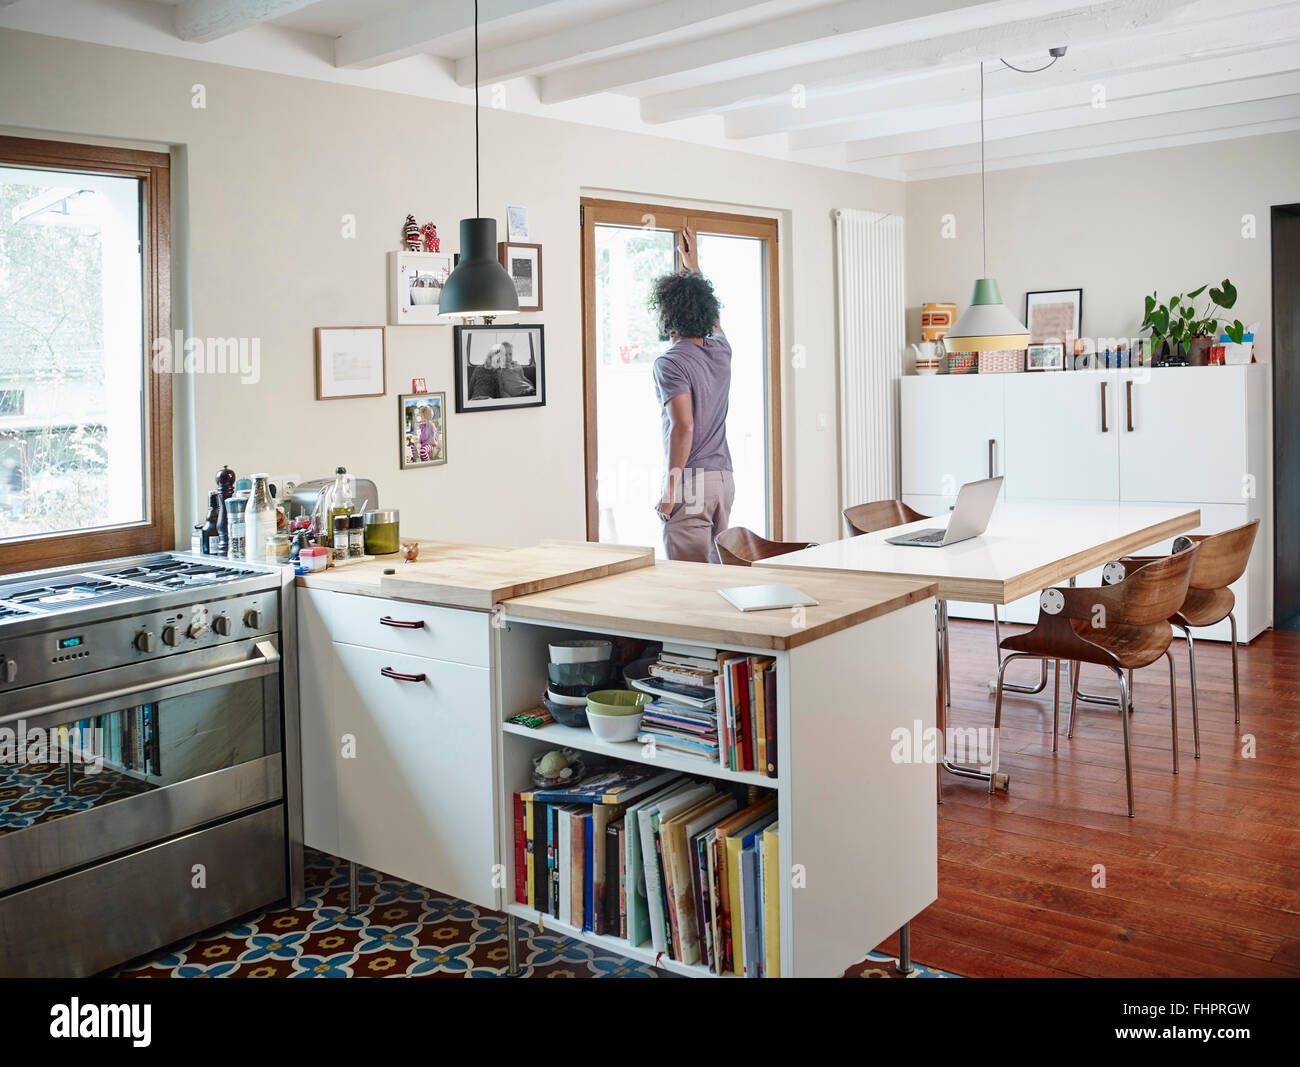 Young man looking out of window in open plan kitchen Stock Photo